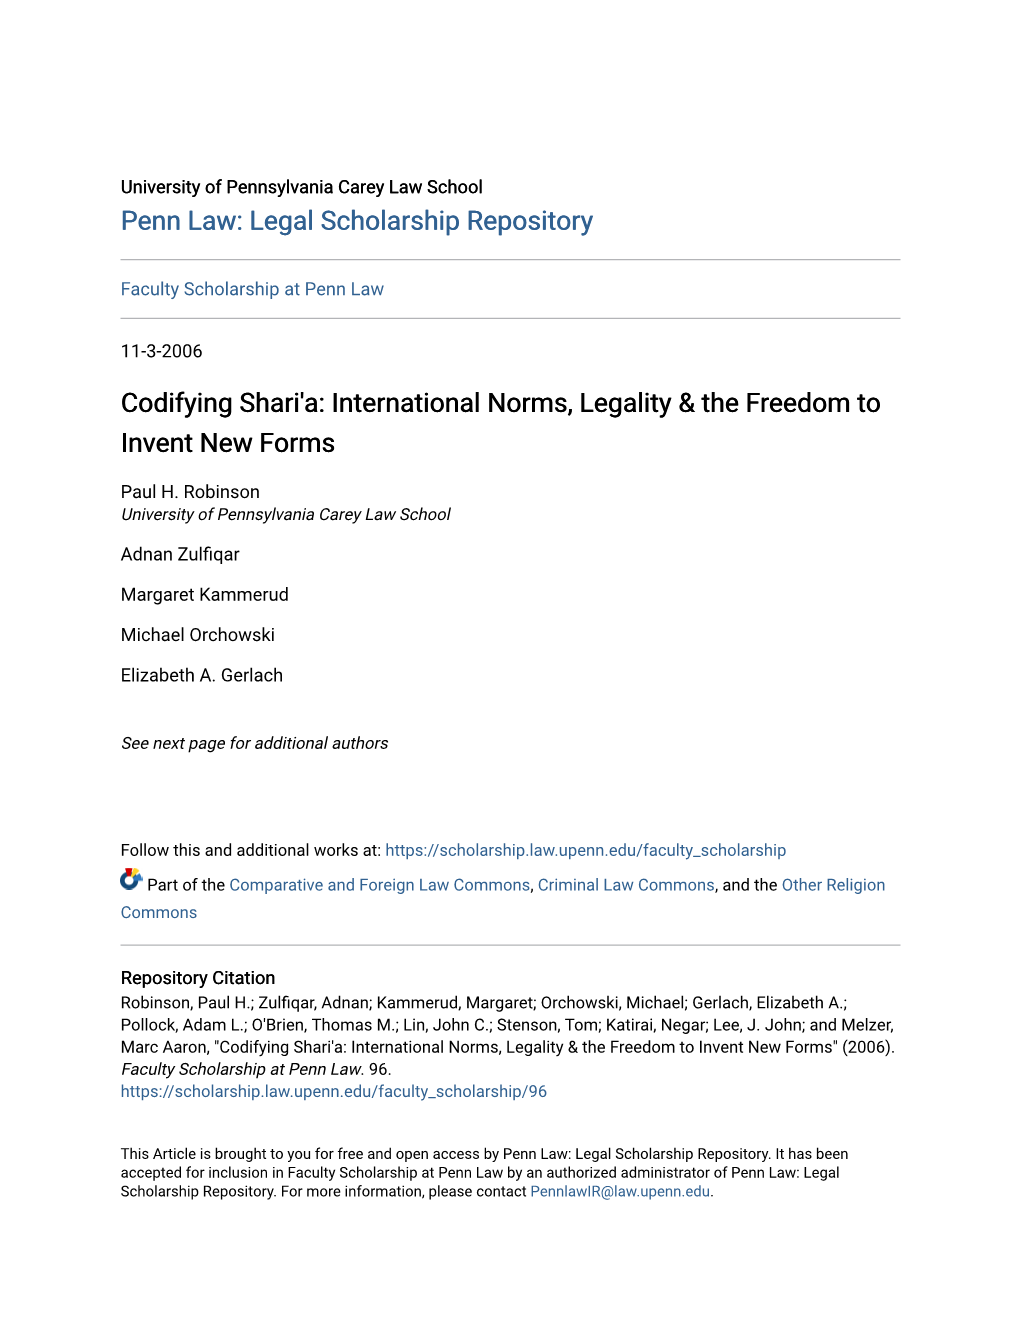 International Norms, Legality & the Freedom to Invent New Forms